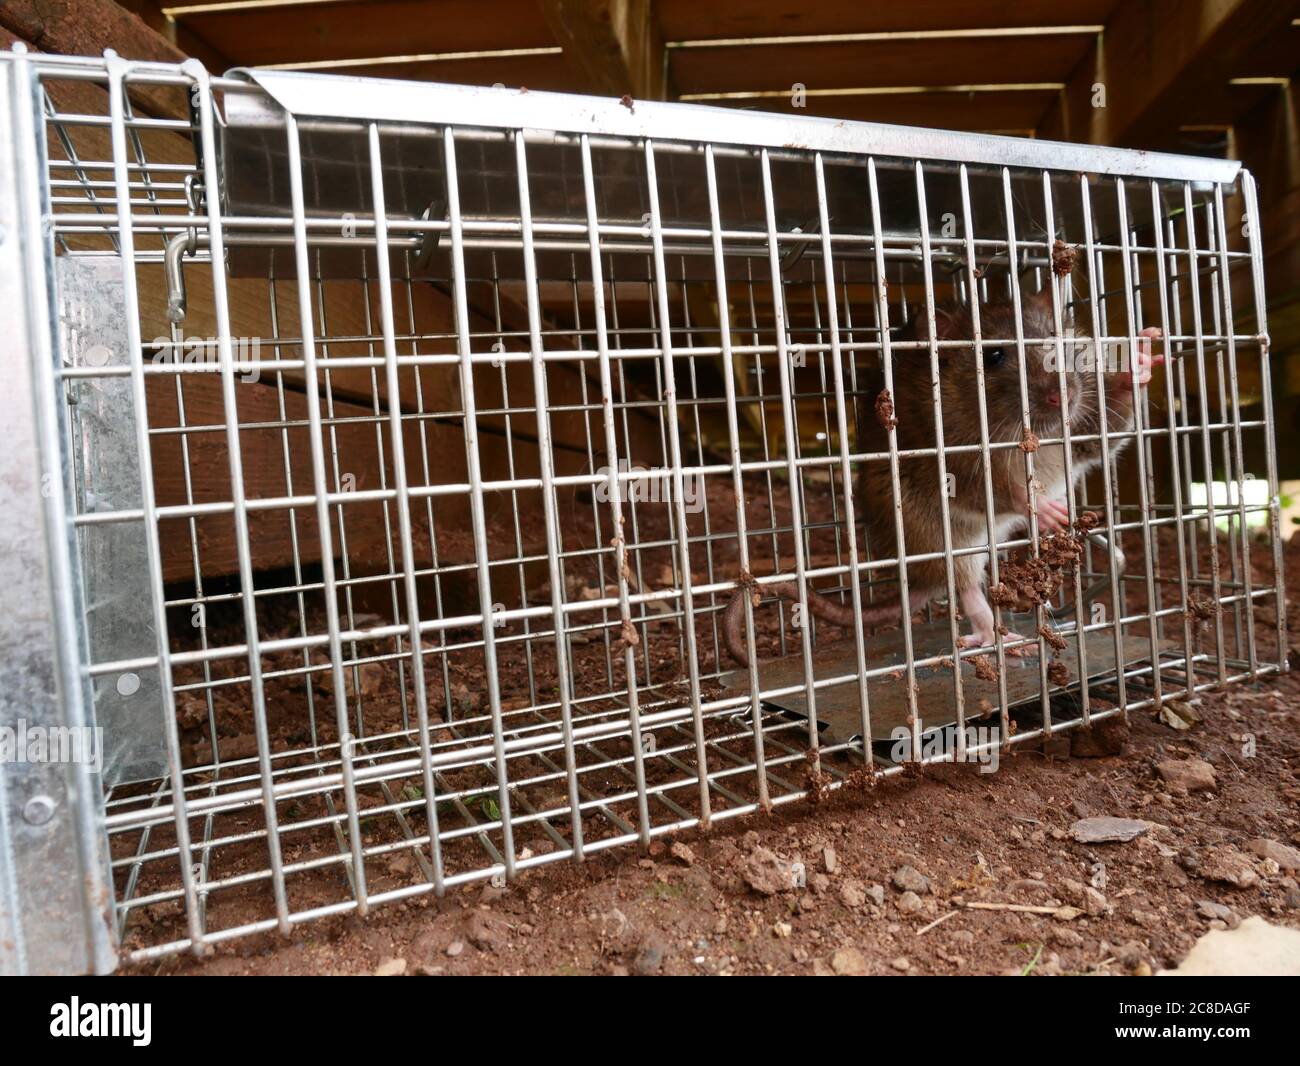 Rat trapped in a humane live rat trap Stock Photo - Alamy